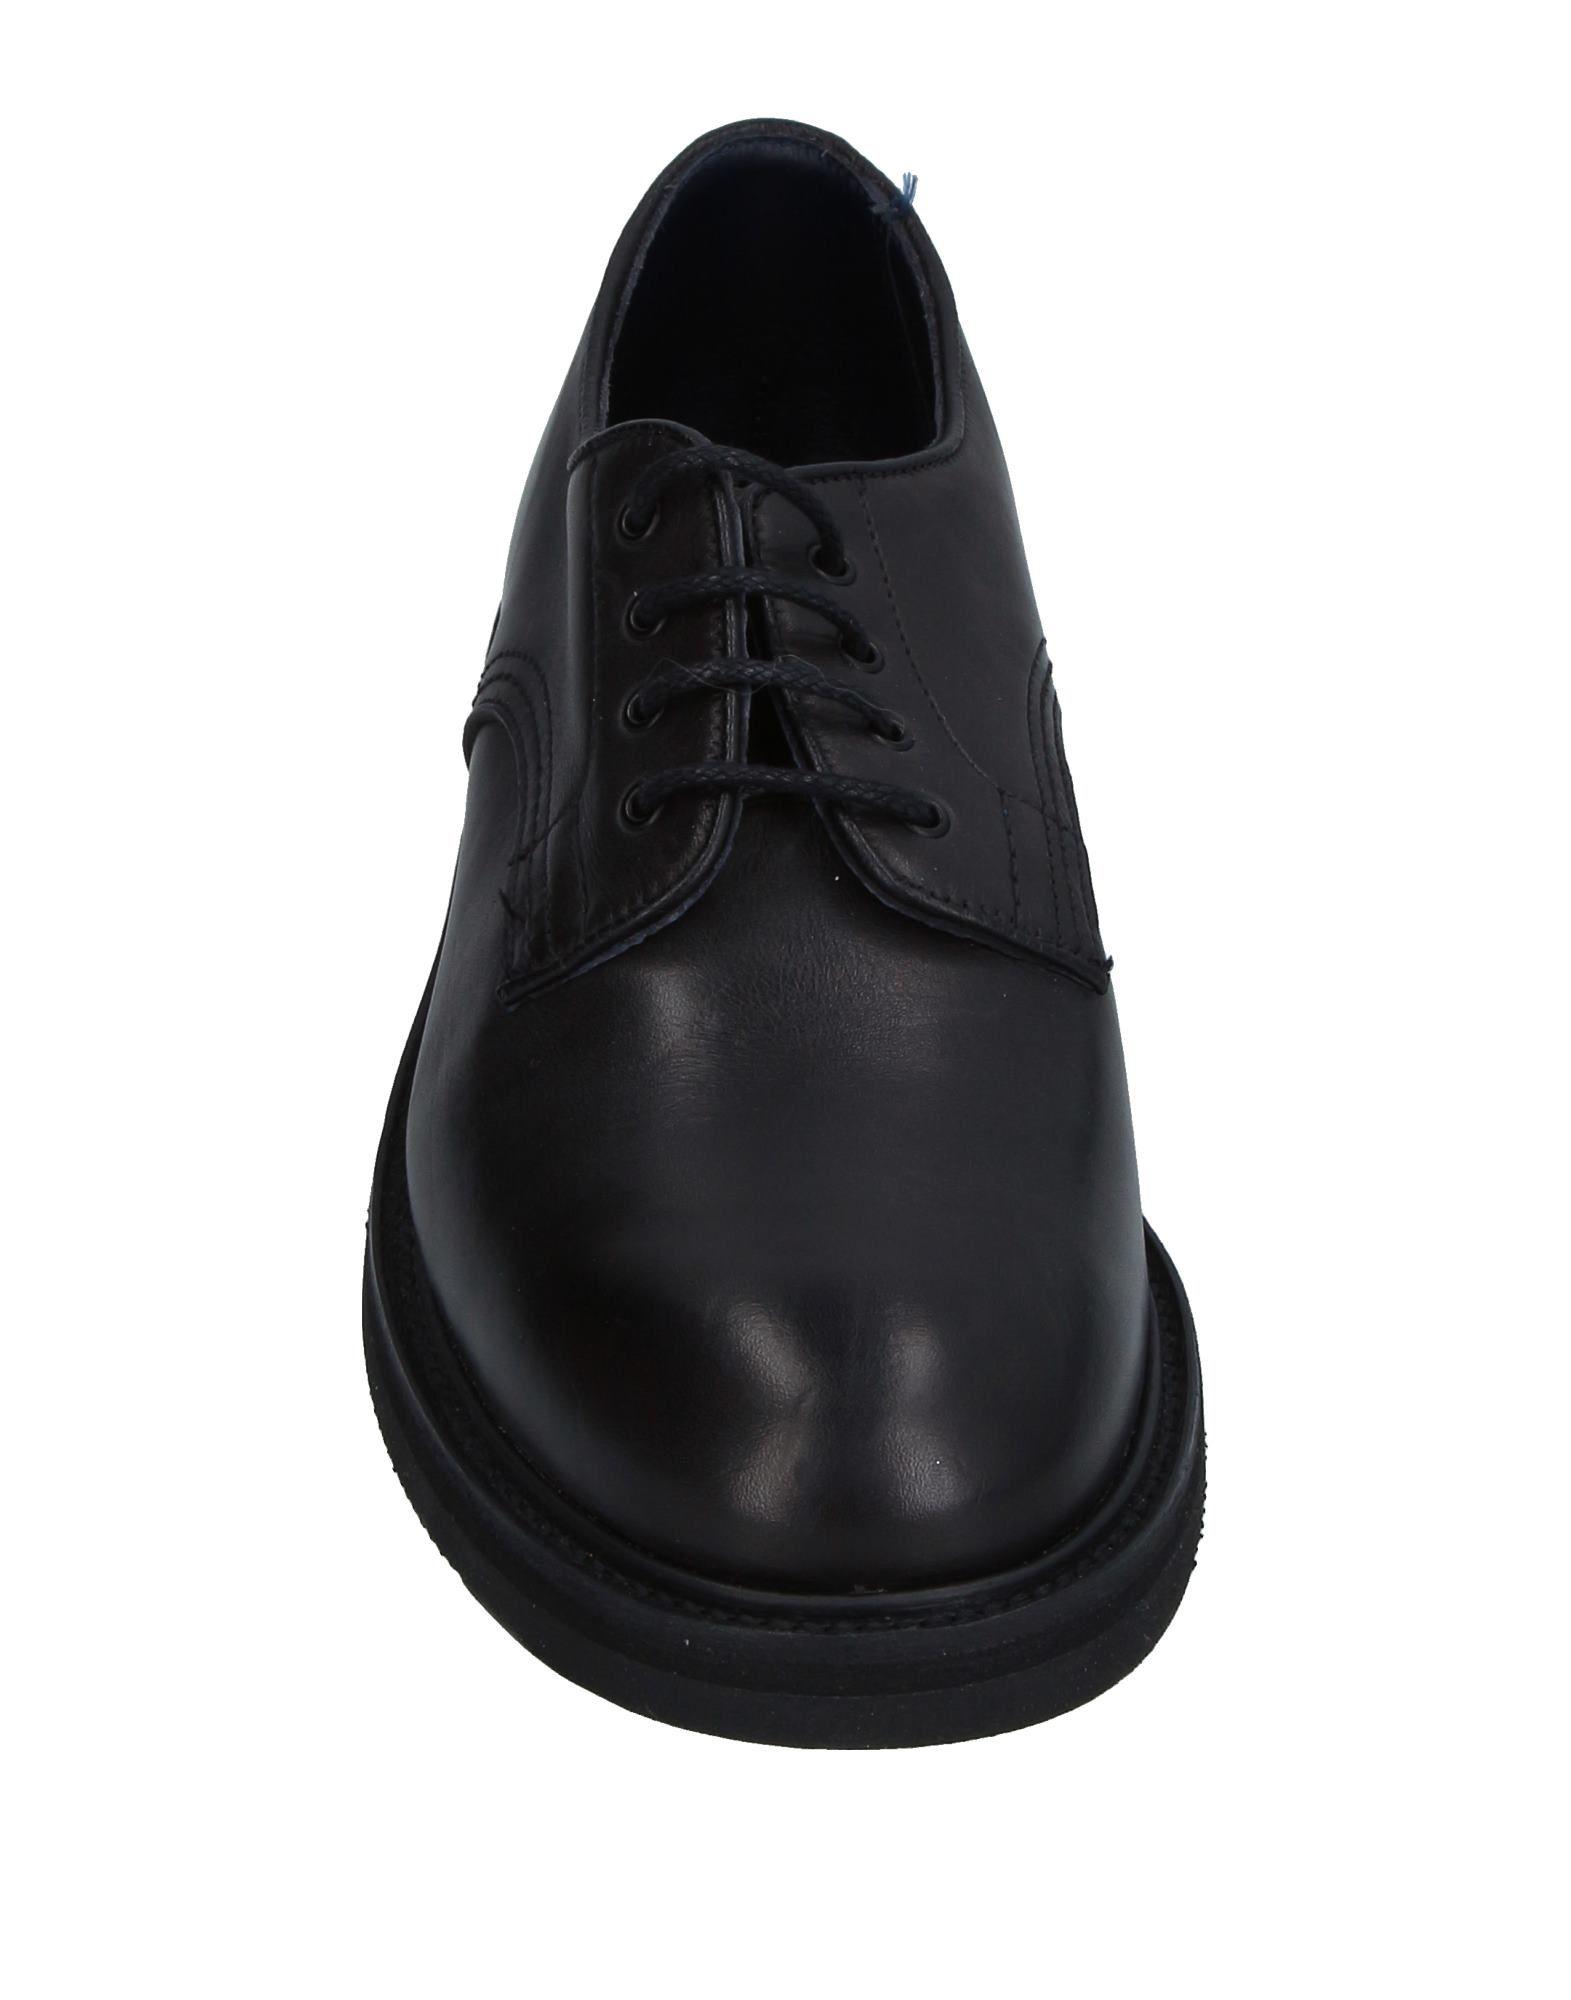 Tricker's Leather Lace-up Shoe in Black for Men - Lyst